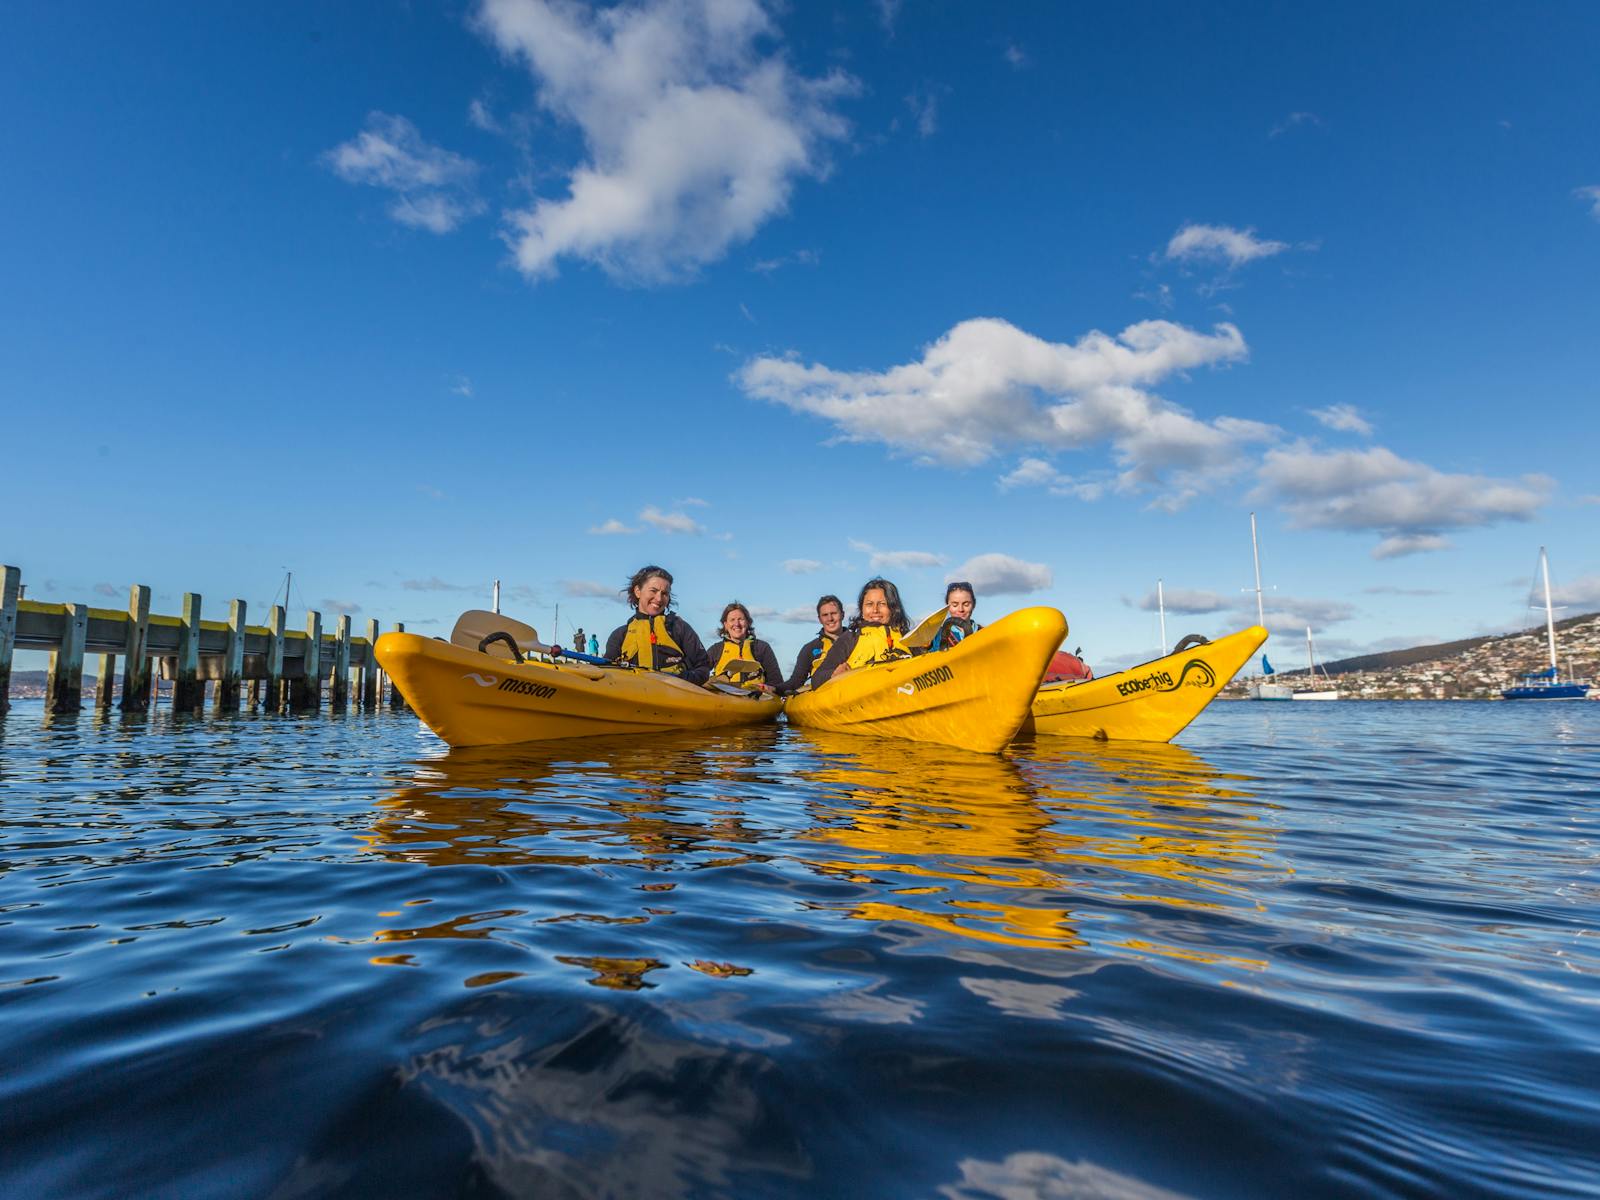 A group of kayakers relaxing in their kayaks on calm water on the Hobart waterfront